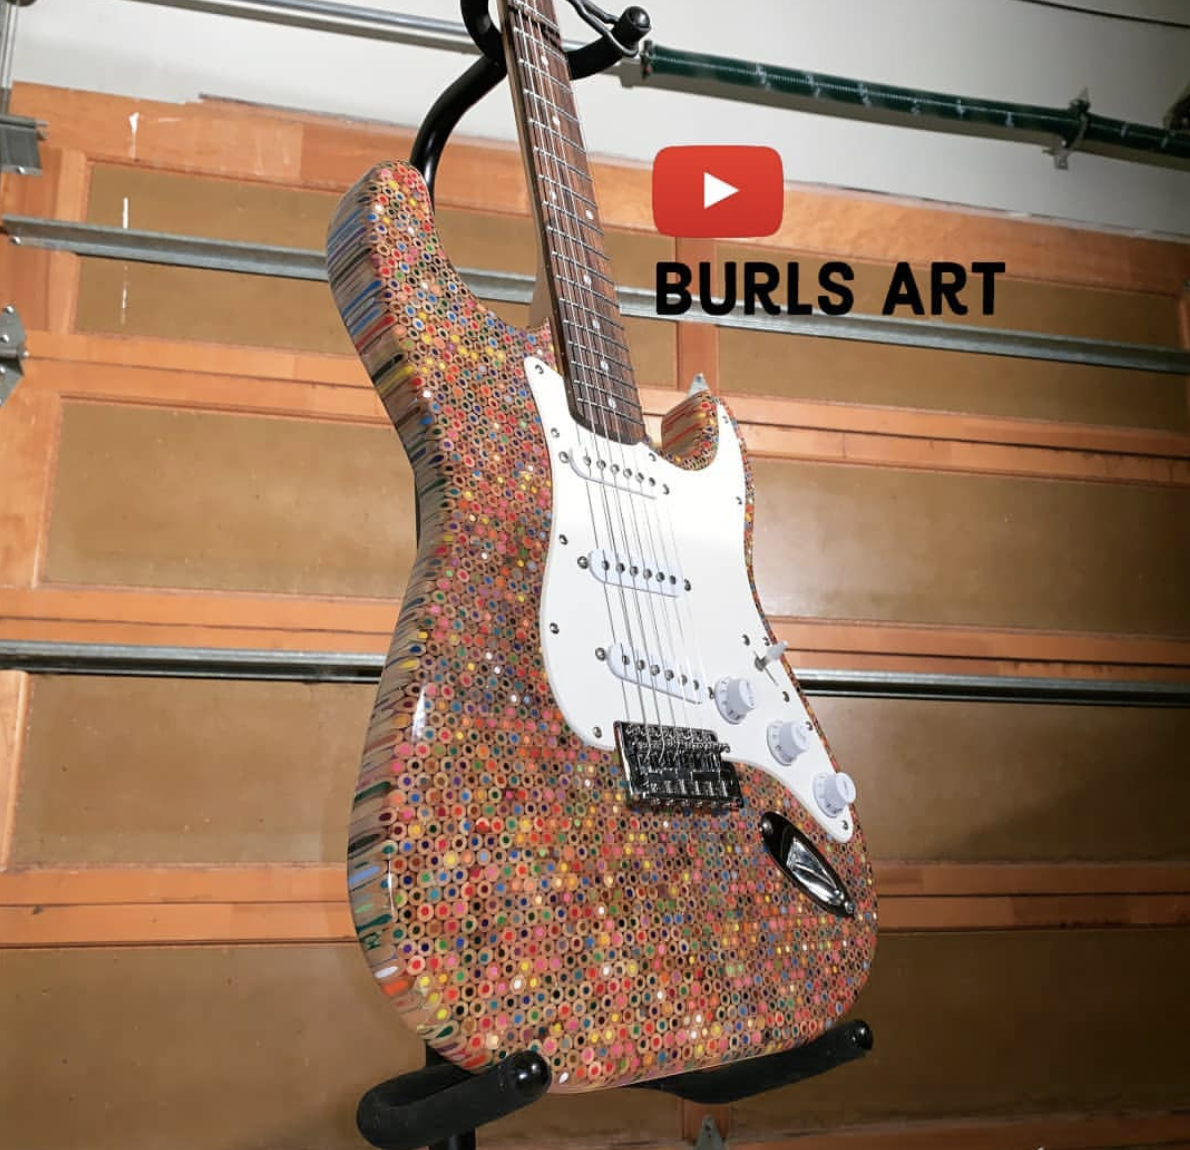 The Custom Fender Stratocaster built by Burls Art. Made entirely out of colored pencils. 